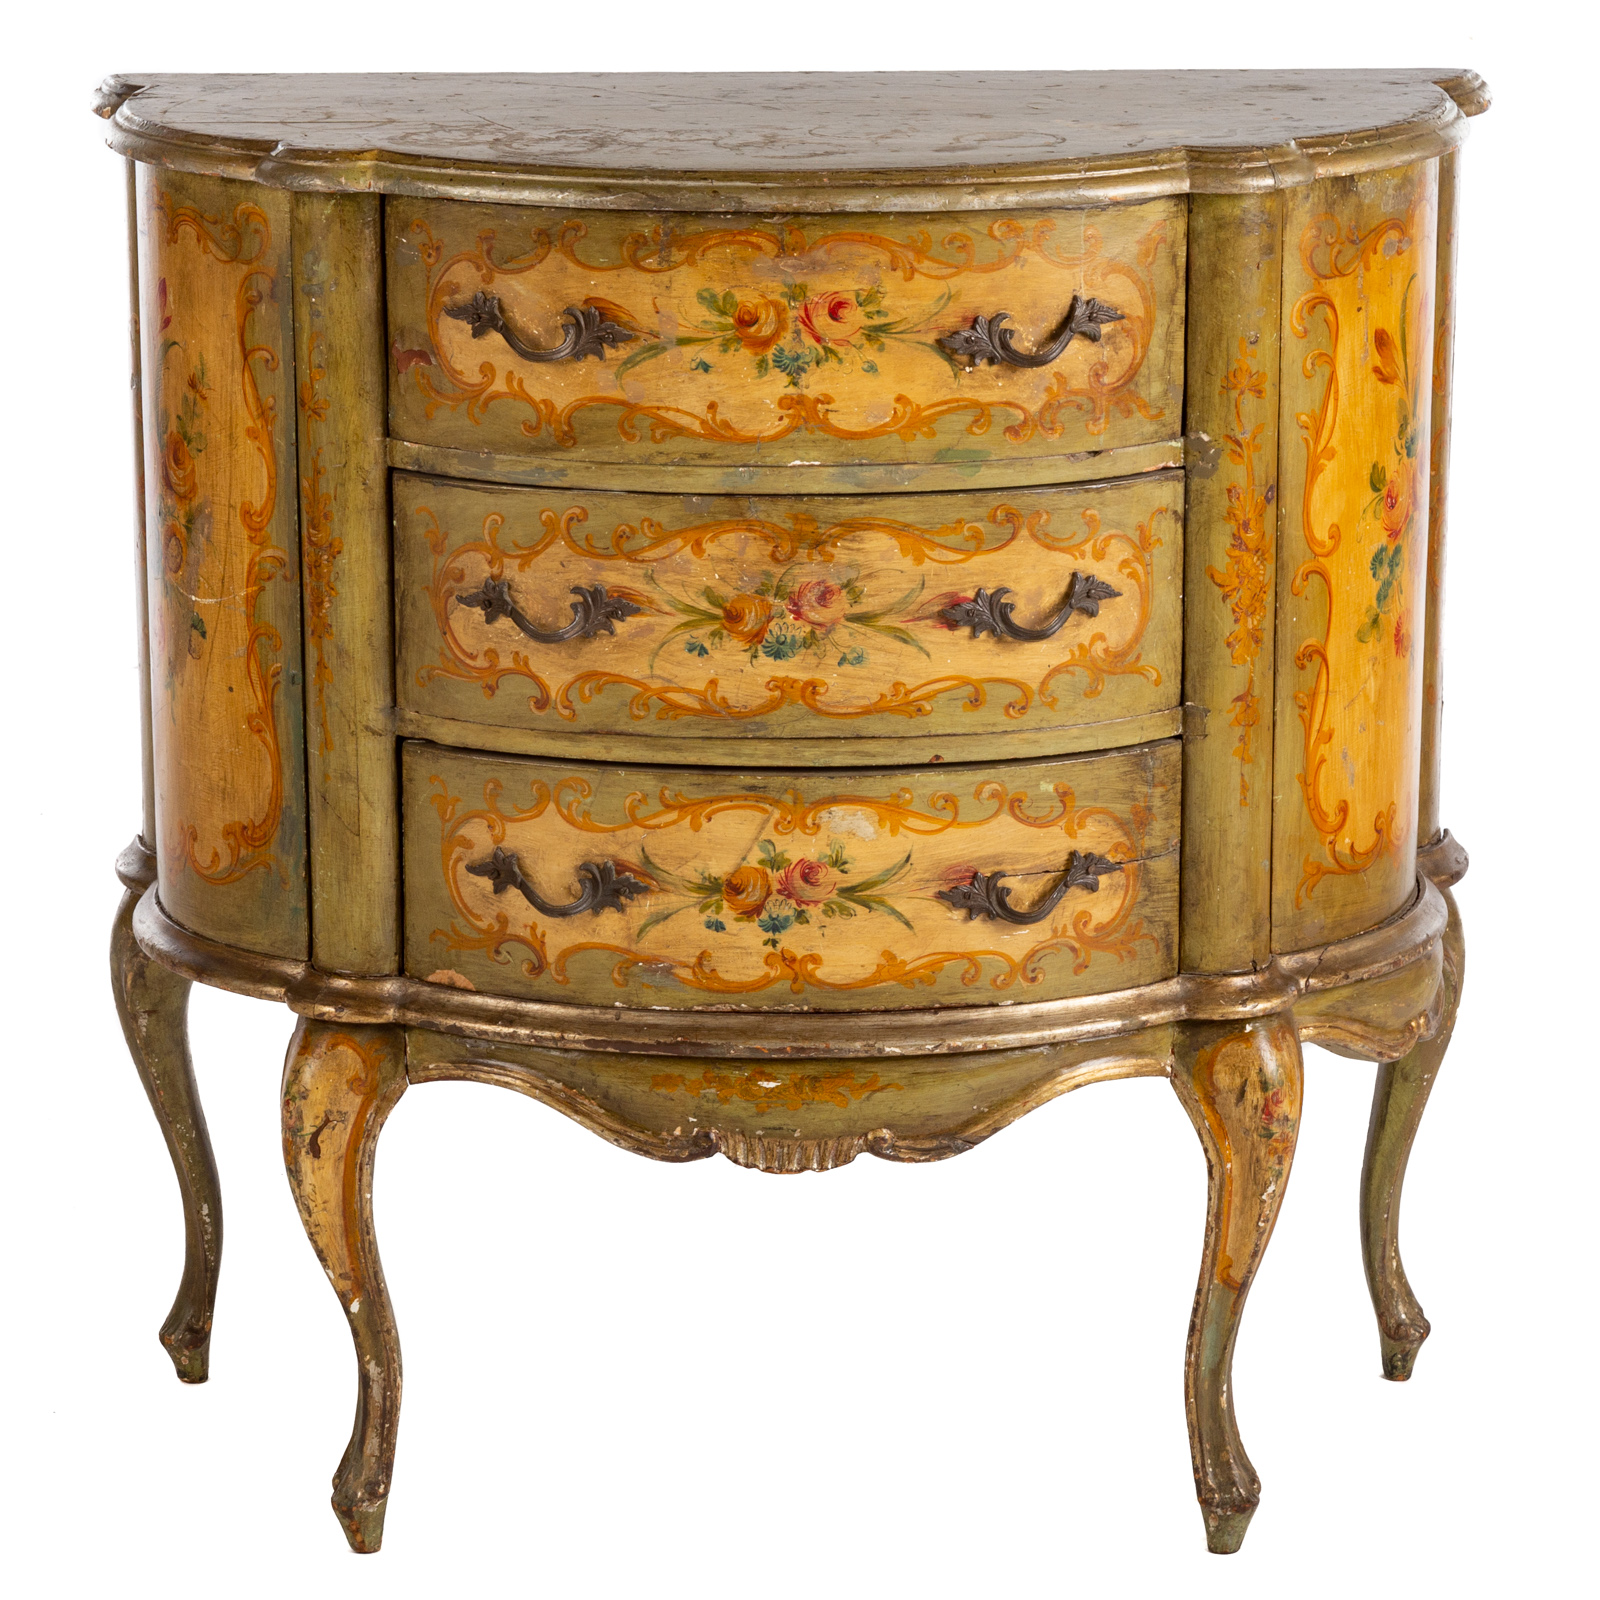 PAINTED WOOD DEMILUNE CONSOLE 20th